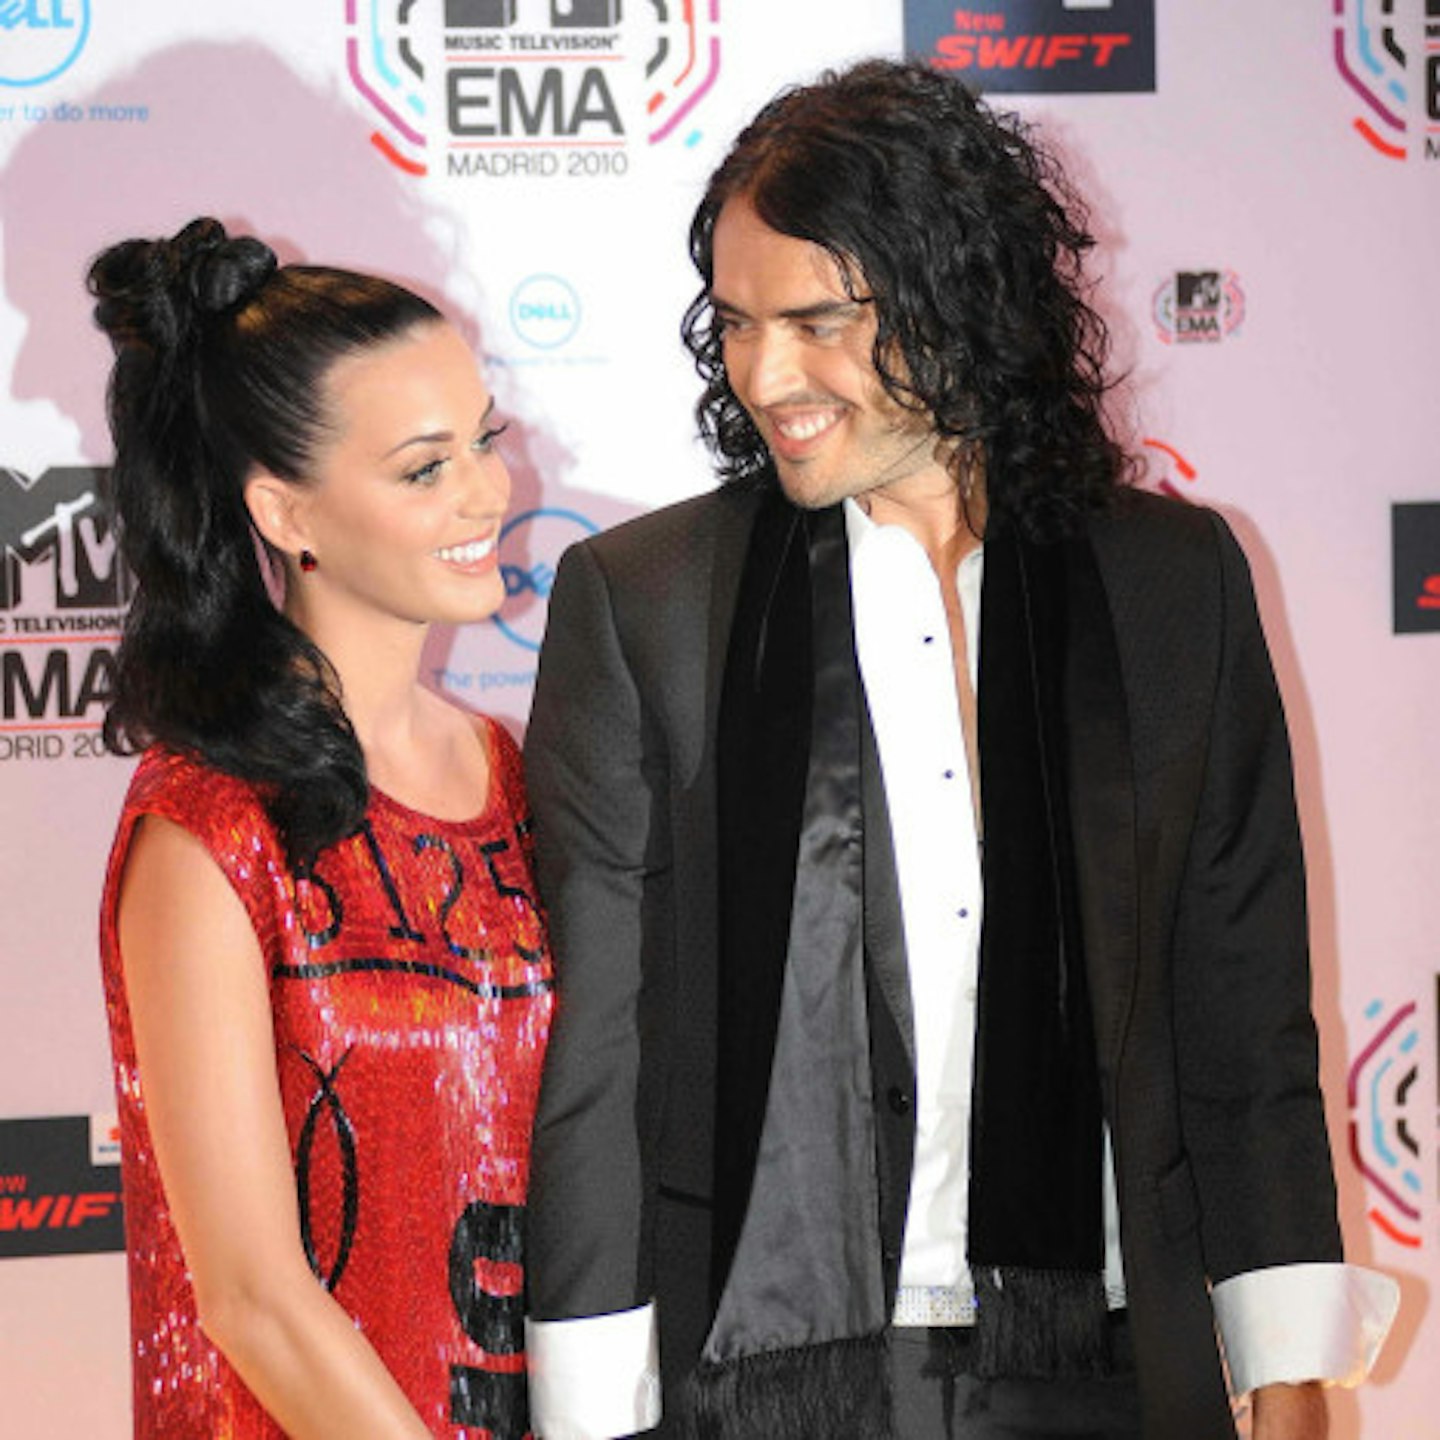 Katy and Brand divorced in 2012